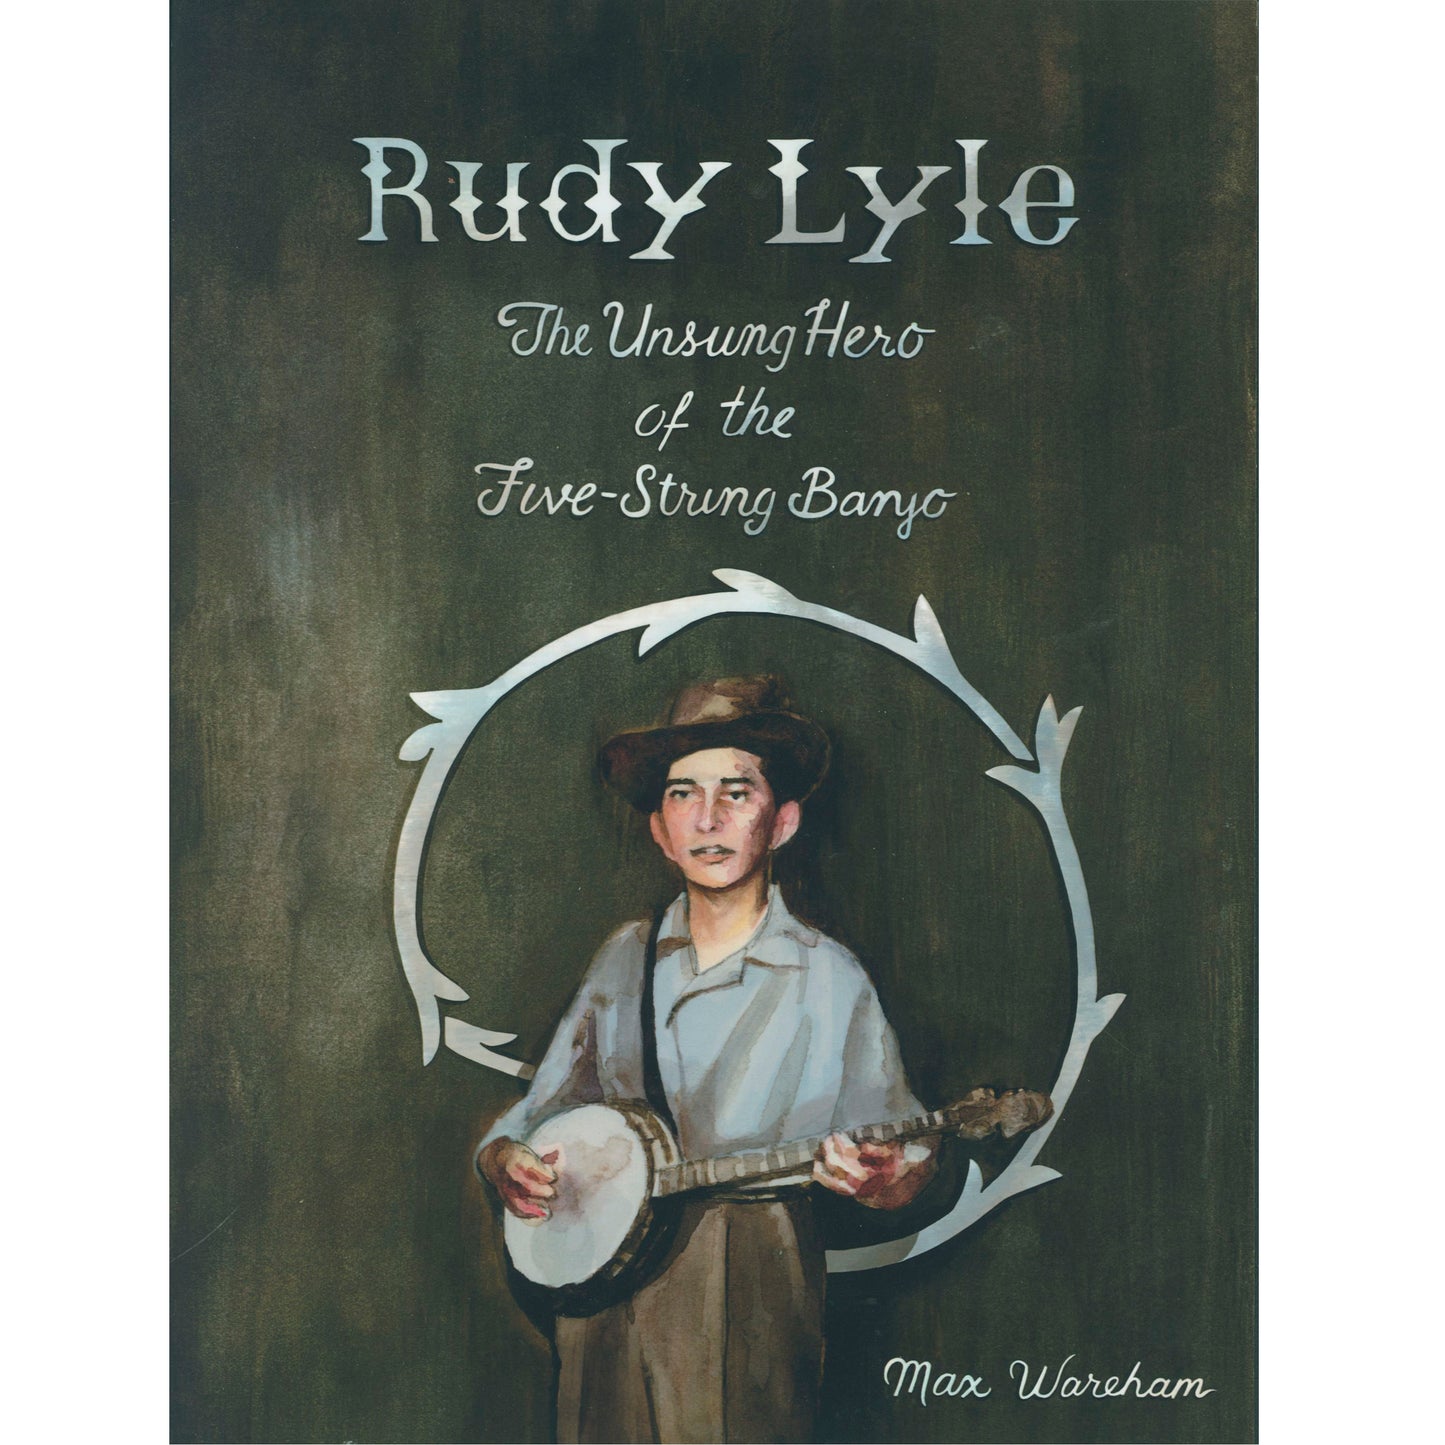 cover of Rudy Lyle: The Unsung Hero of the Five-String Banjo